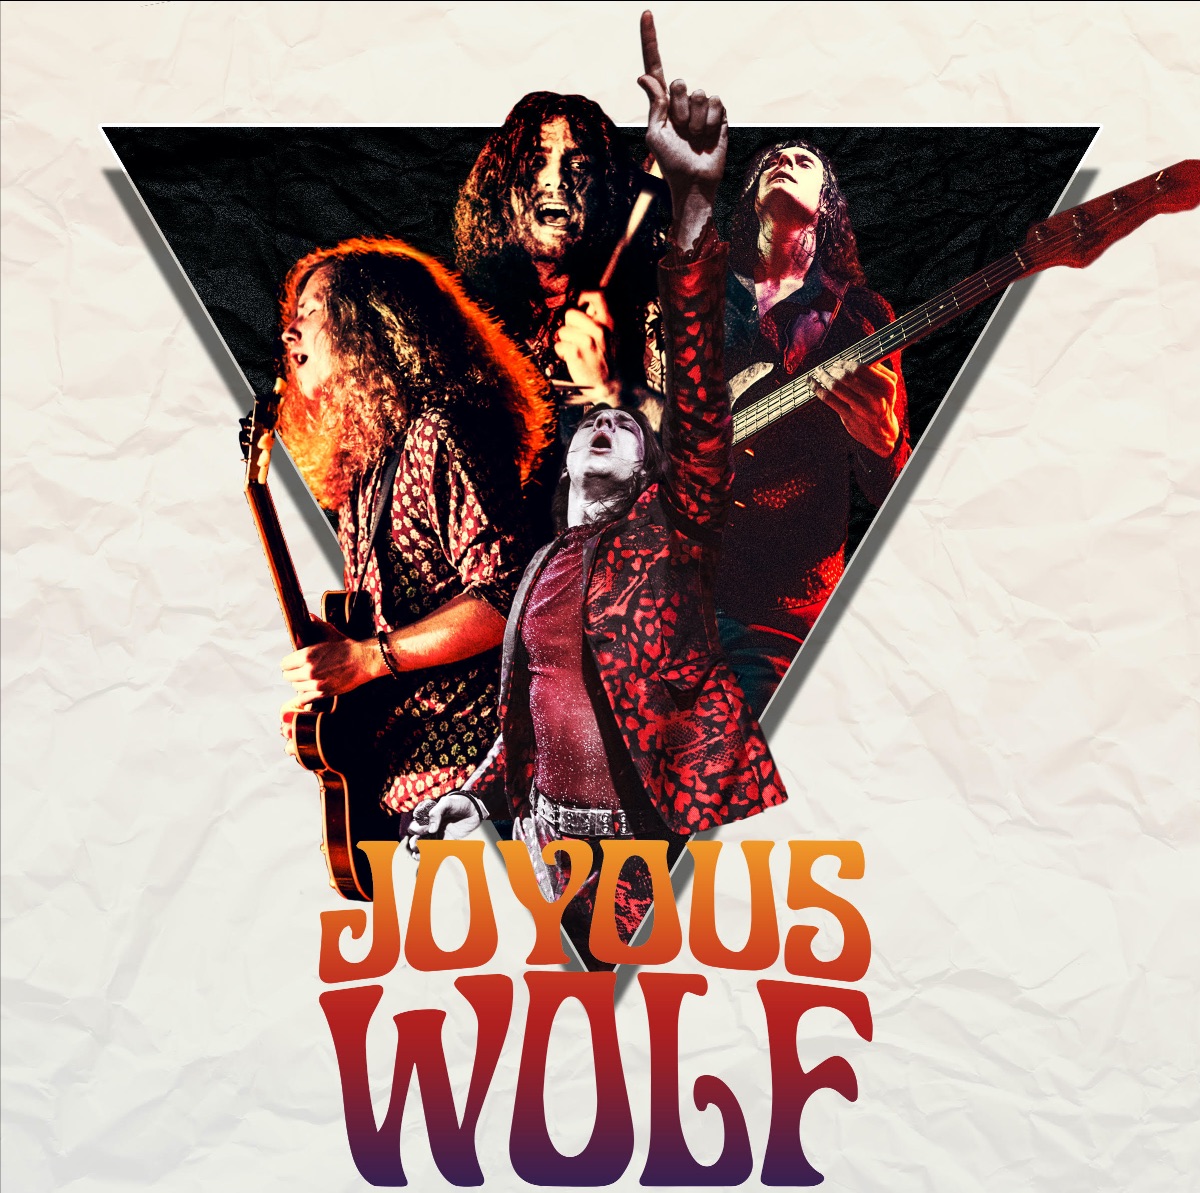 Joyous Wolf Premiere "Odyssey" Animated Video At American Songwriter